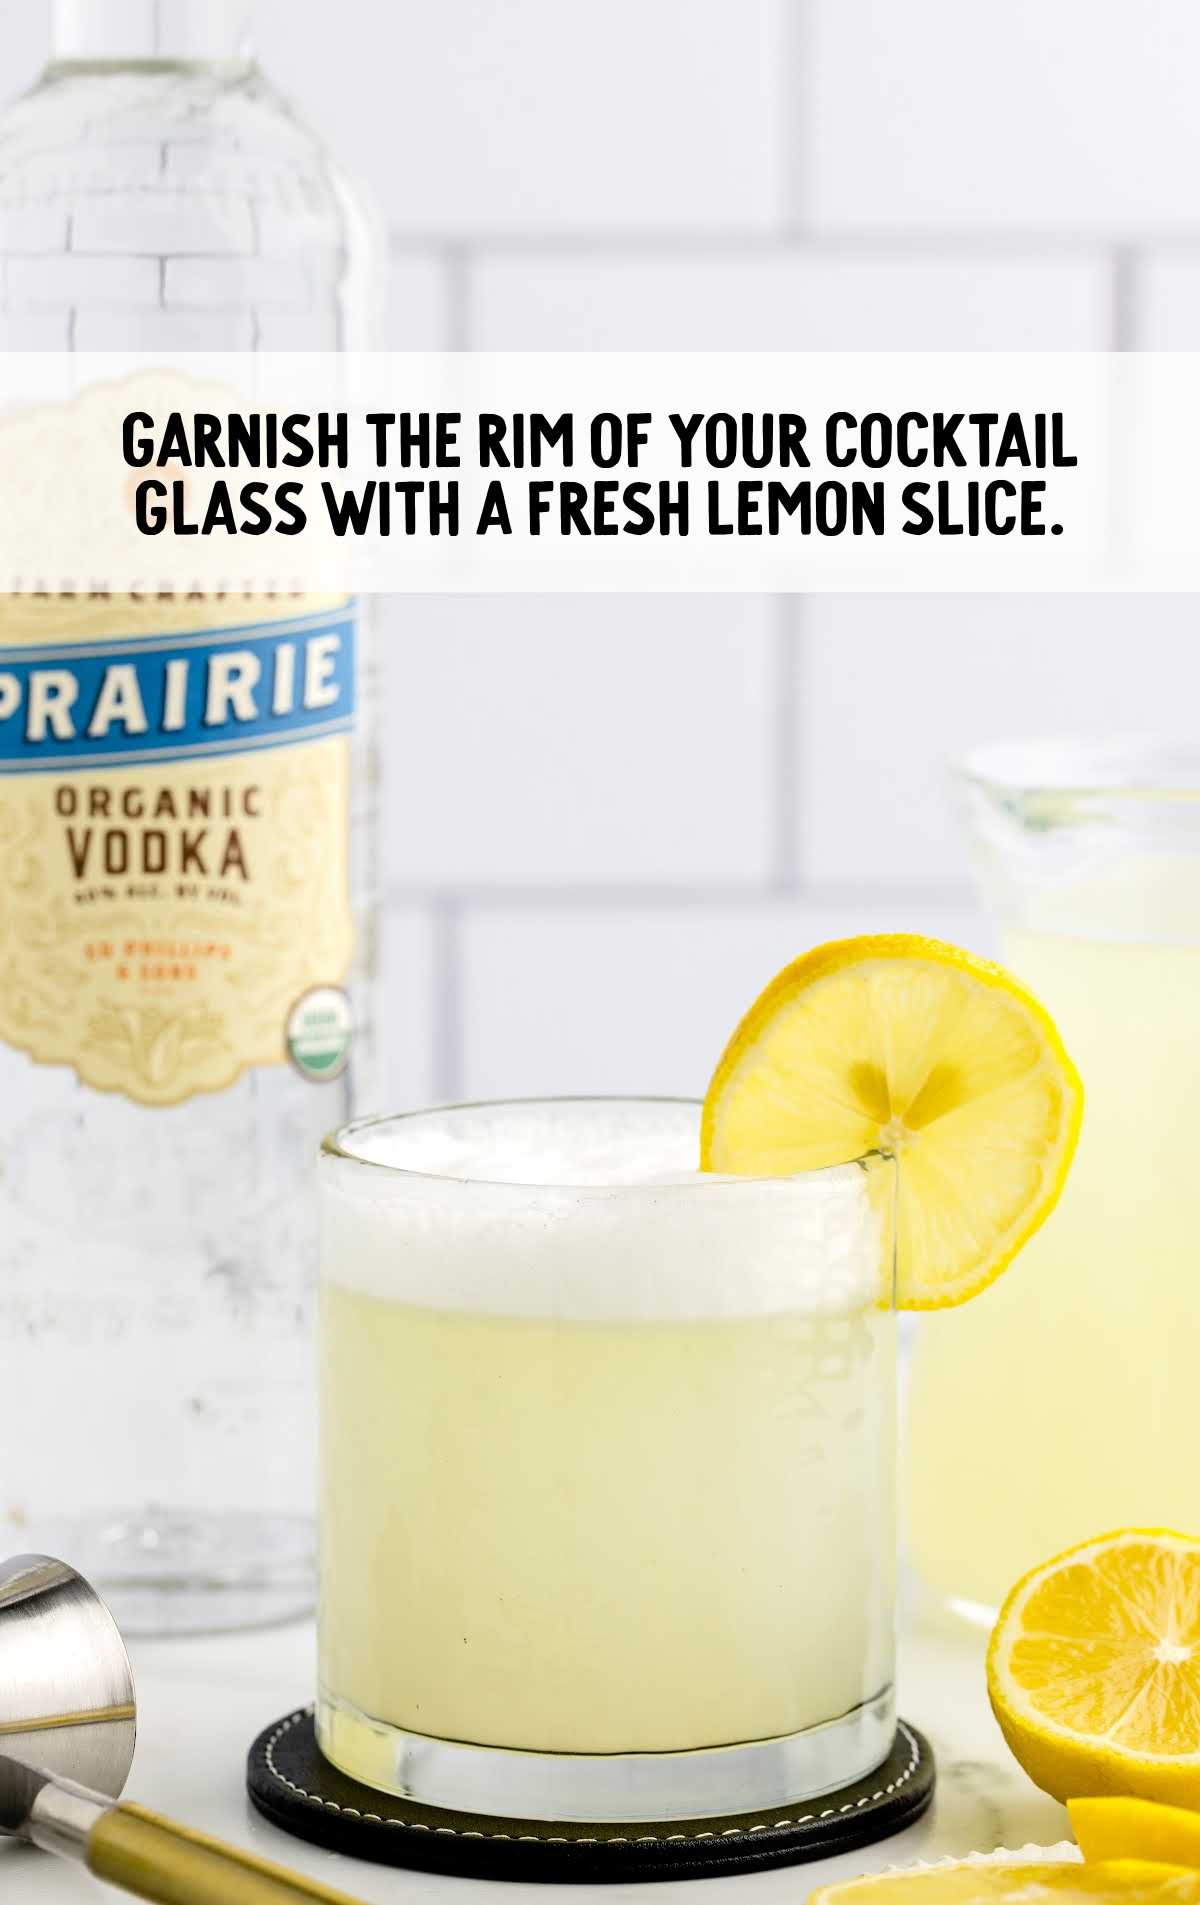 glass of the drink garnished with a slice of lemon